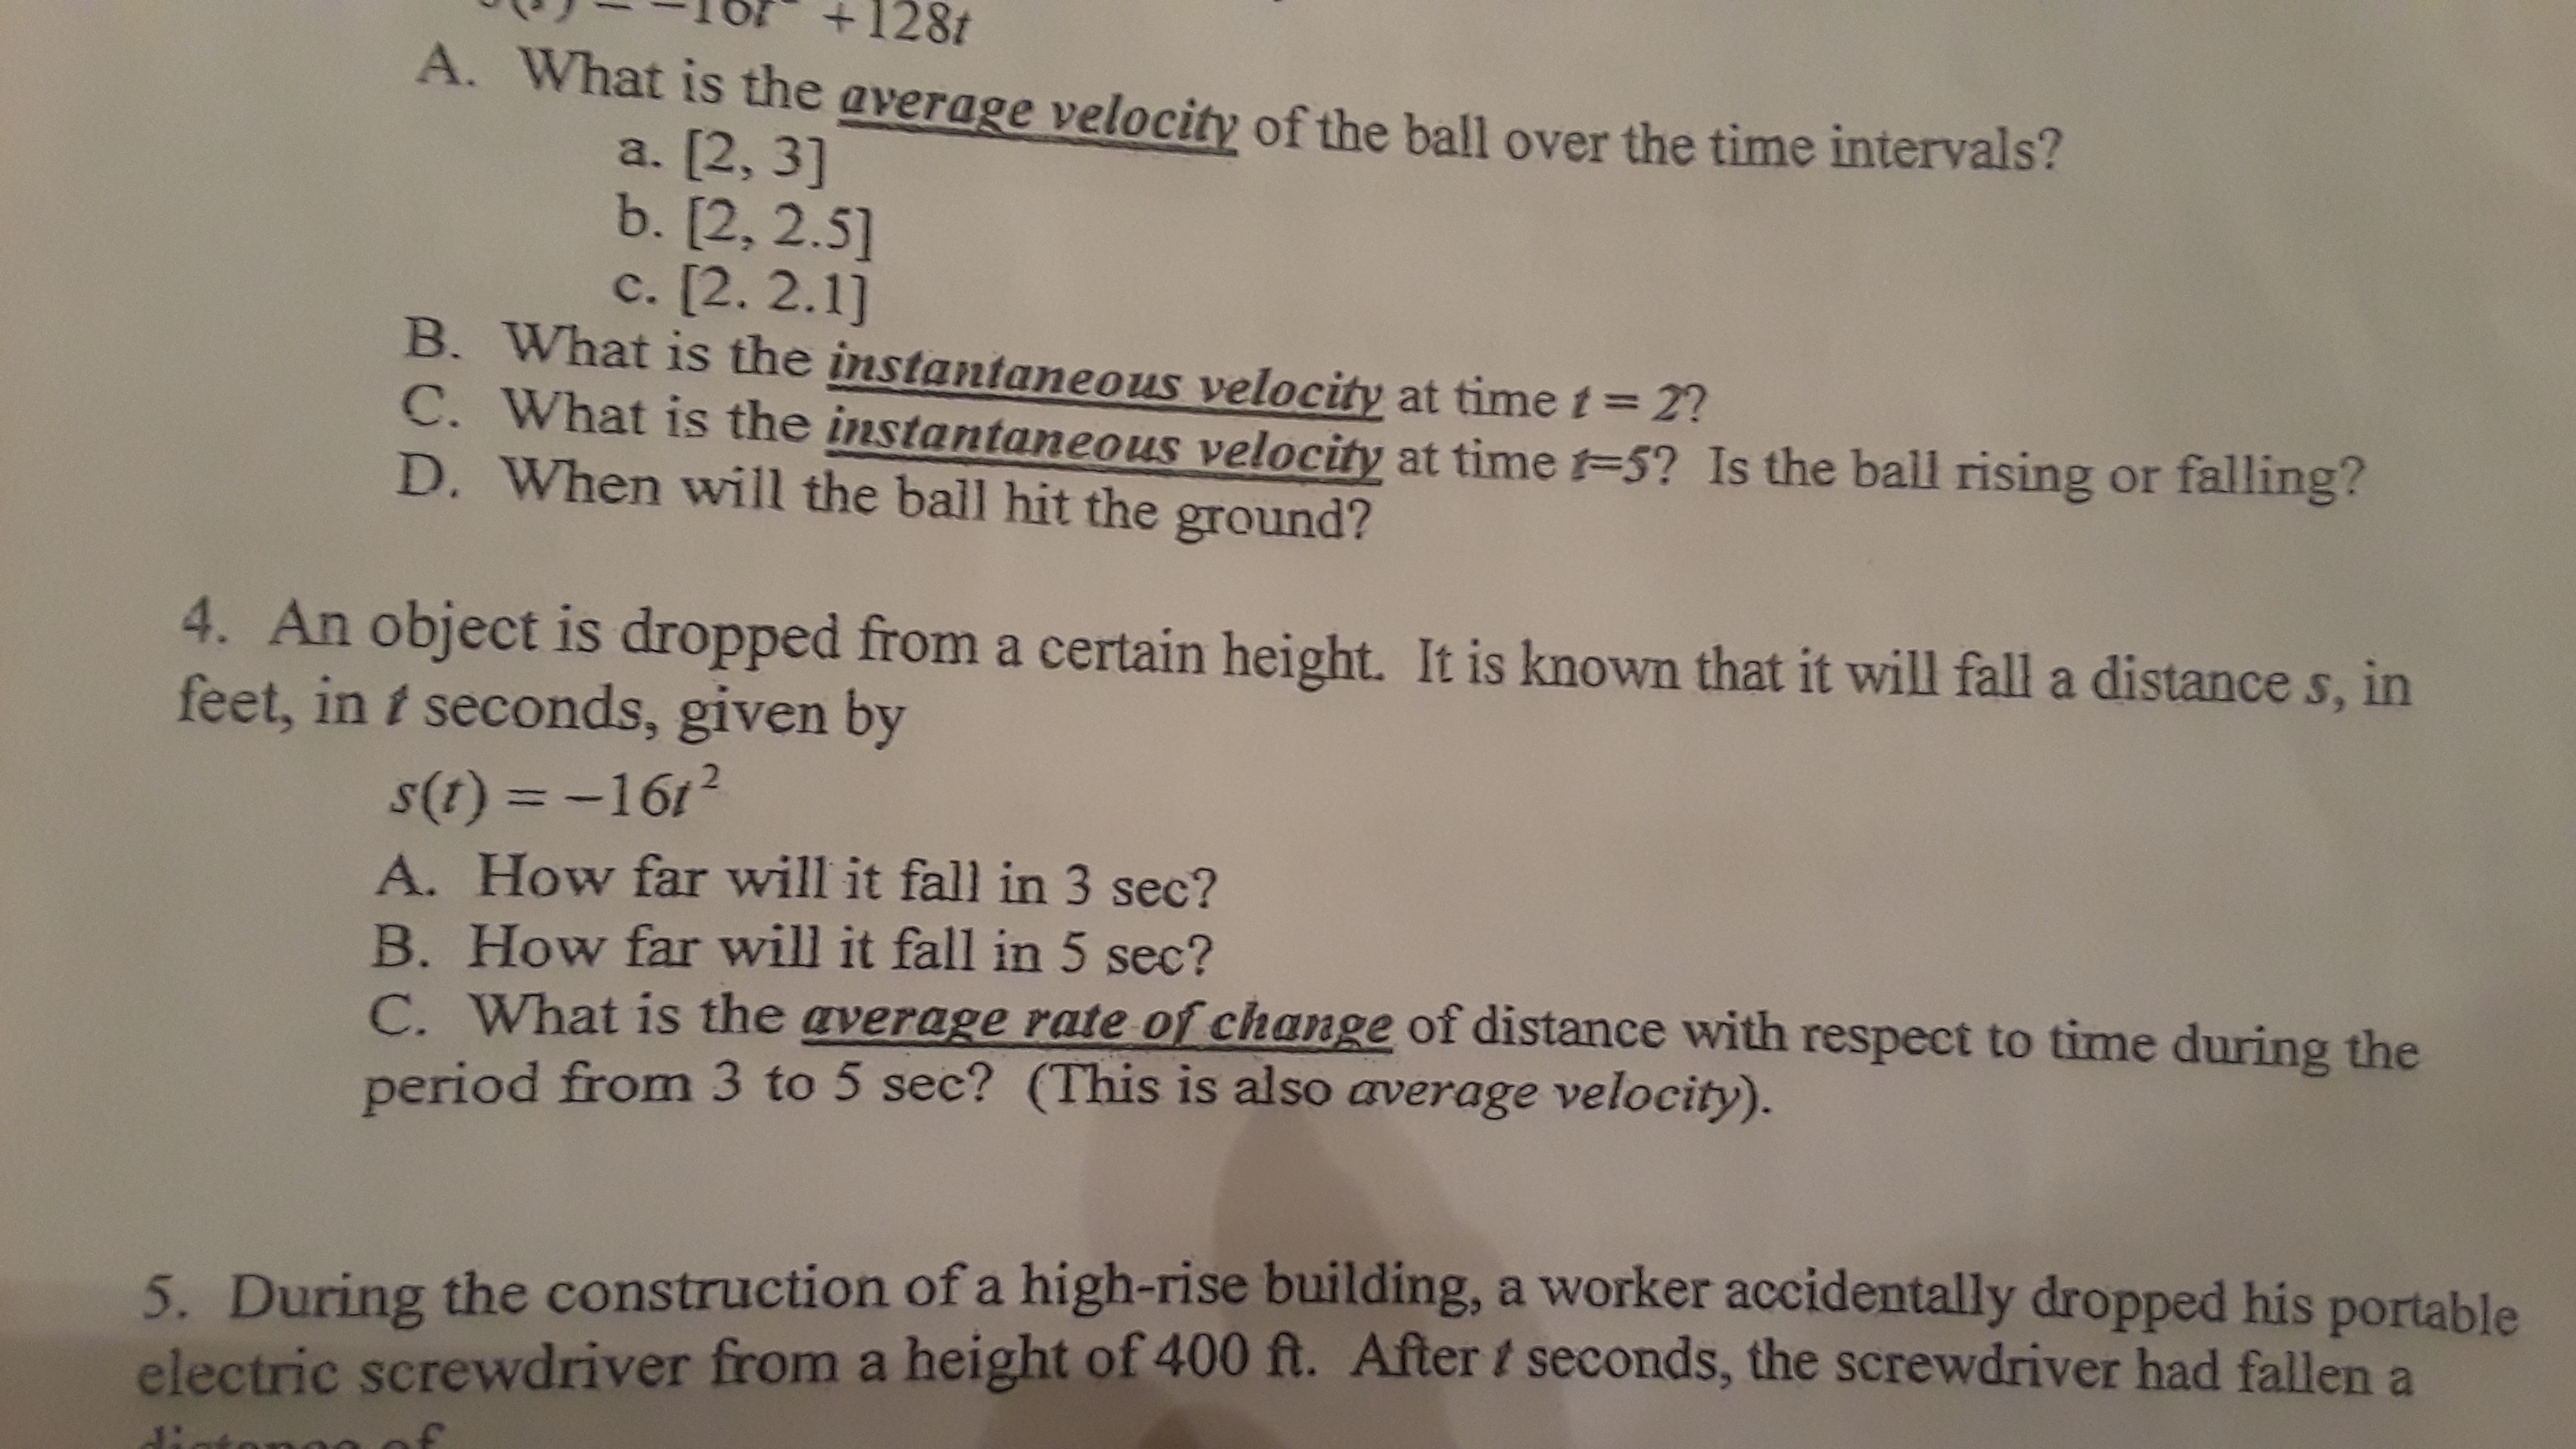 128t
A. What is the average velocity of the ball over the time intervals?
a. [2, 3]
b. [2, 2.5]
c. [2. 2.1]
B. What is the instantaneous velocity at time t= 2?
C. What is the instantaneous velocity at time t=5? Is the ball rising or falling?
D. When will the ball hit the ground?
4. An object is dropped from a certain height. It is known that it will fall a distance s, in
feet, in t seconds, given by
s(1) = -161?
A. How far will it fall in 3 sec?
B. How far will it fall in 5 sec?
C. What is the average rate of change of distance with respect to time during the
period from 3 to 5 sec? (This is also average velocity).
5. During the construction of a high-rise building, a worker accidentally dropped his portable
electric screwdriver from a height of 400 ft. After t seconds, the screwdriver had fallen a
di
